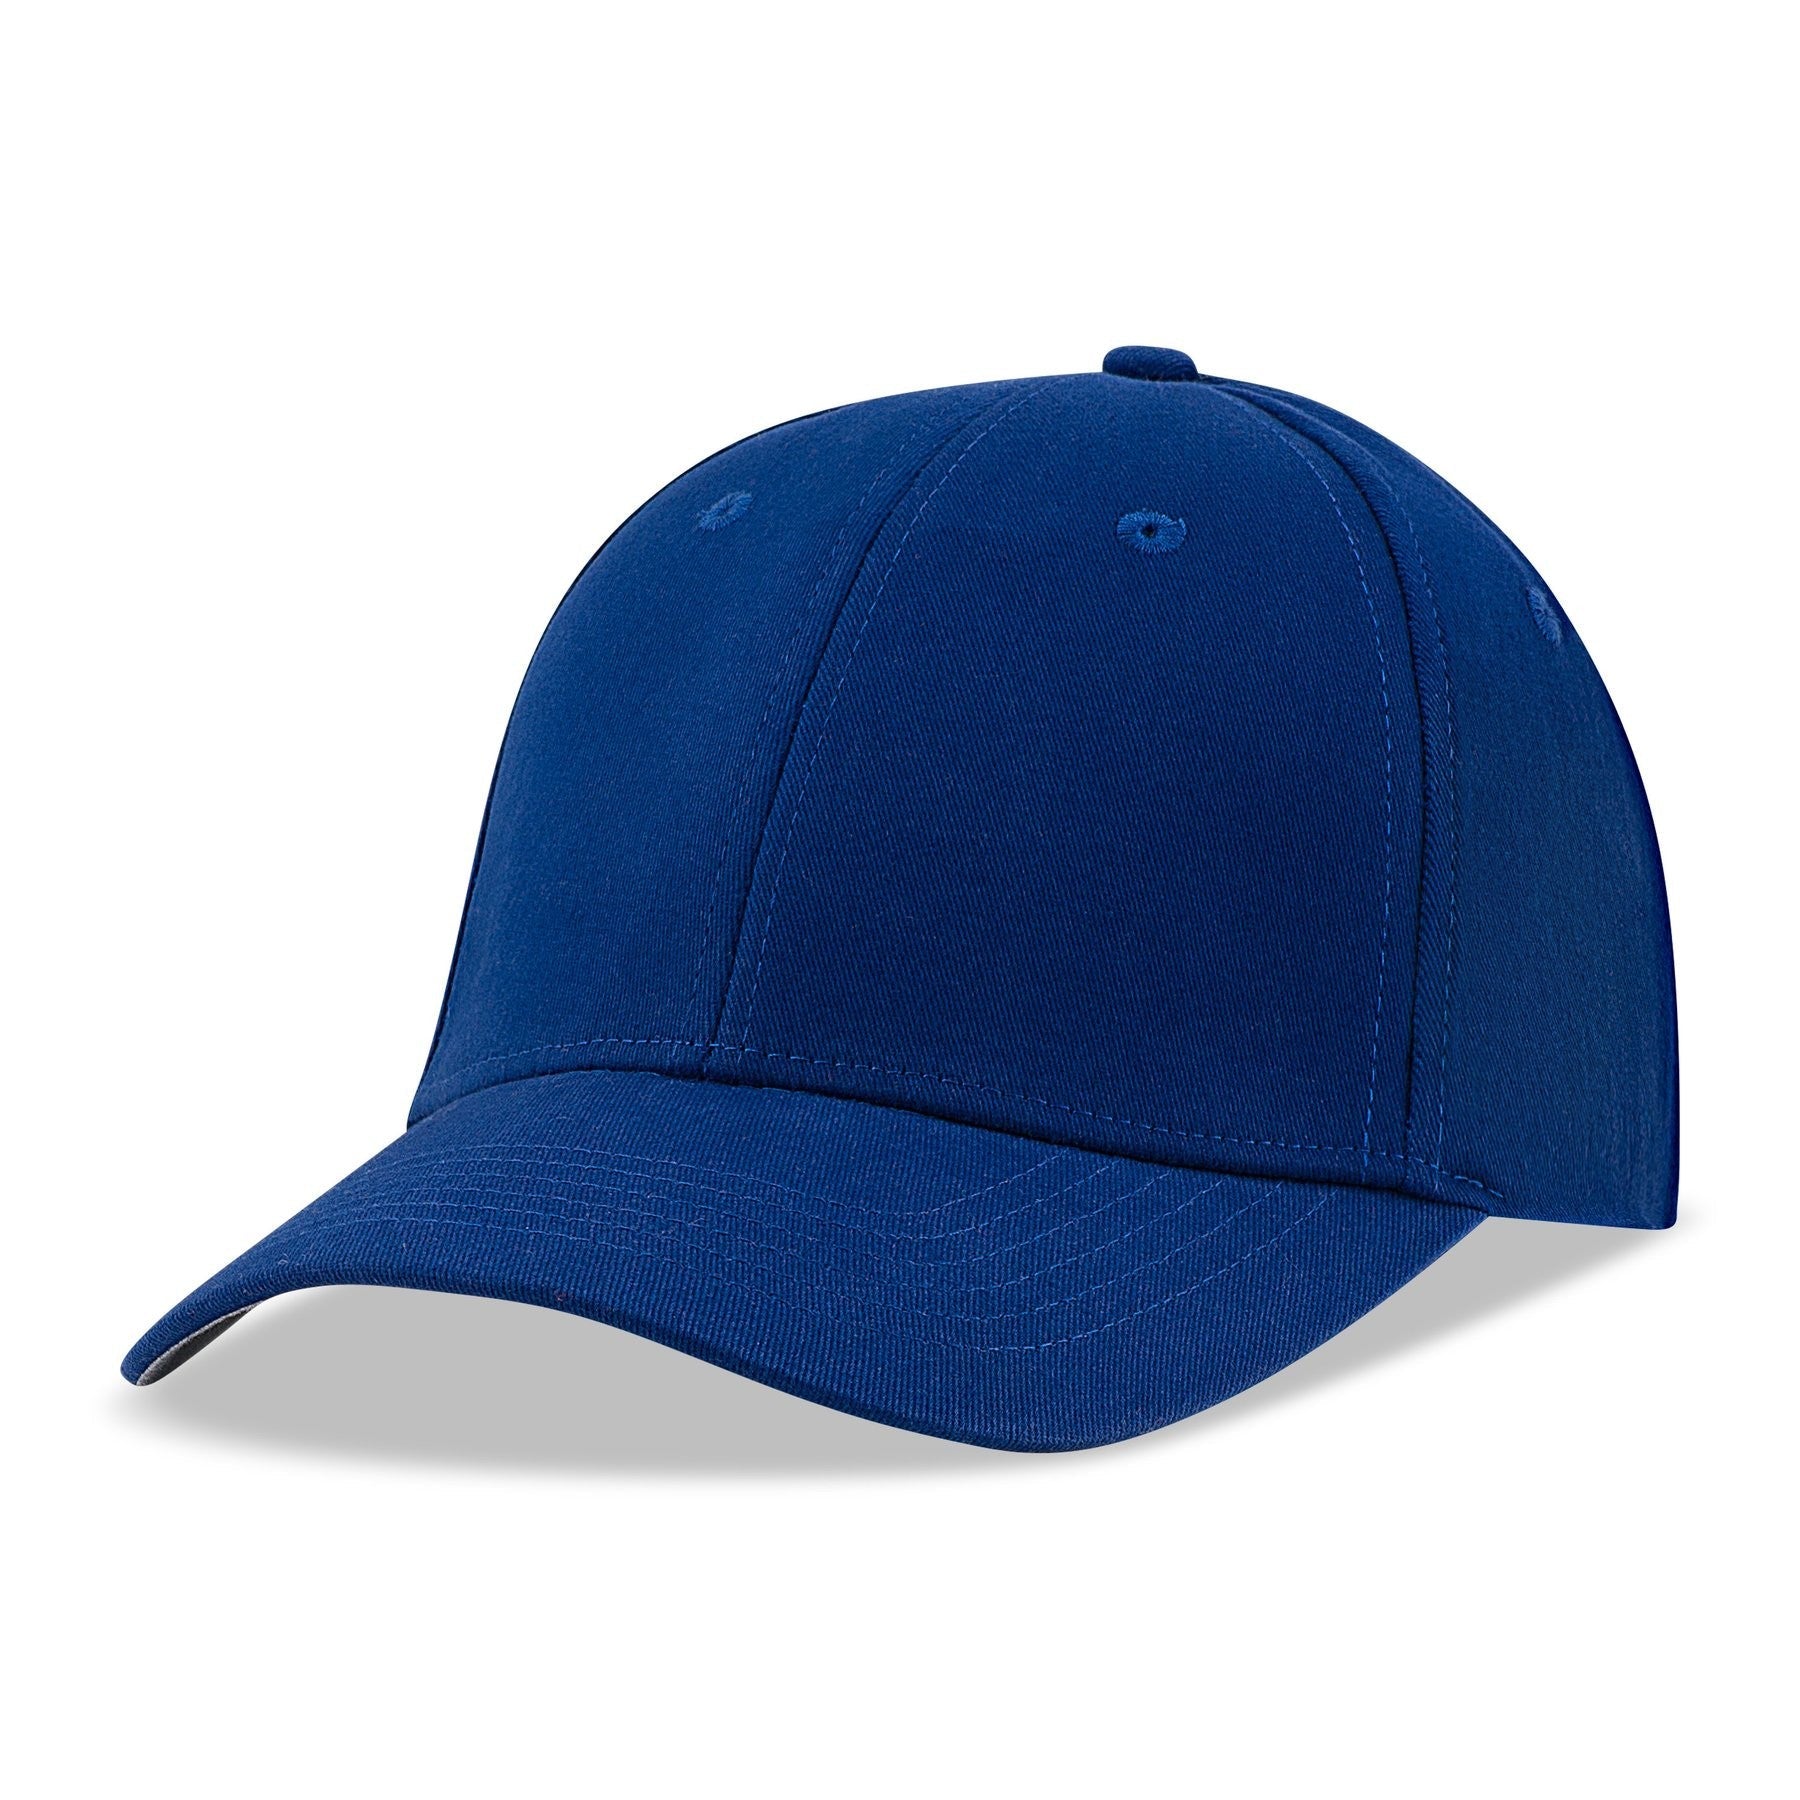 3000 Nu-Fit Pro-Style Cotton Spandex Fitted Cap - Budget Promotion Headware CA$ 18.39 Royal